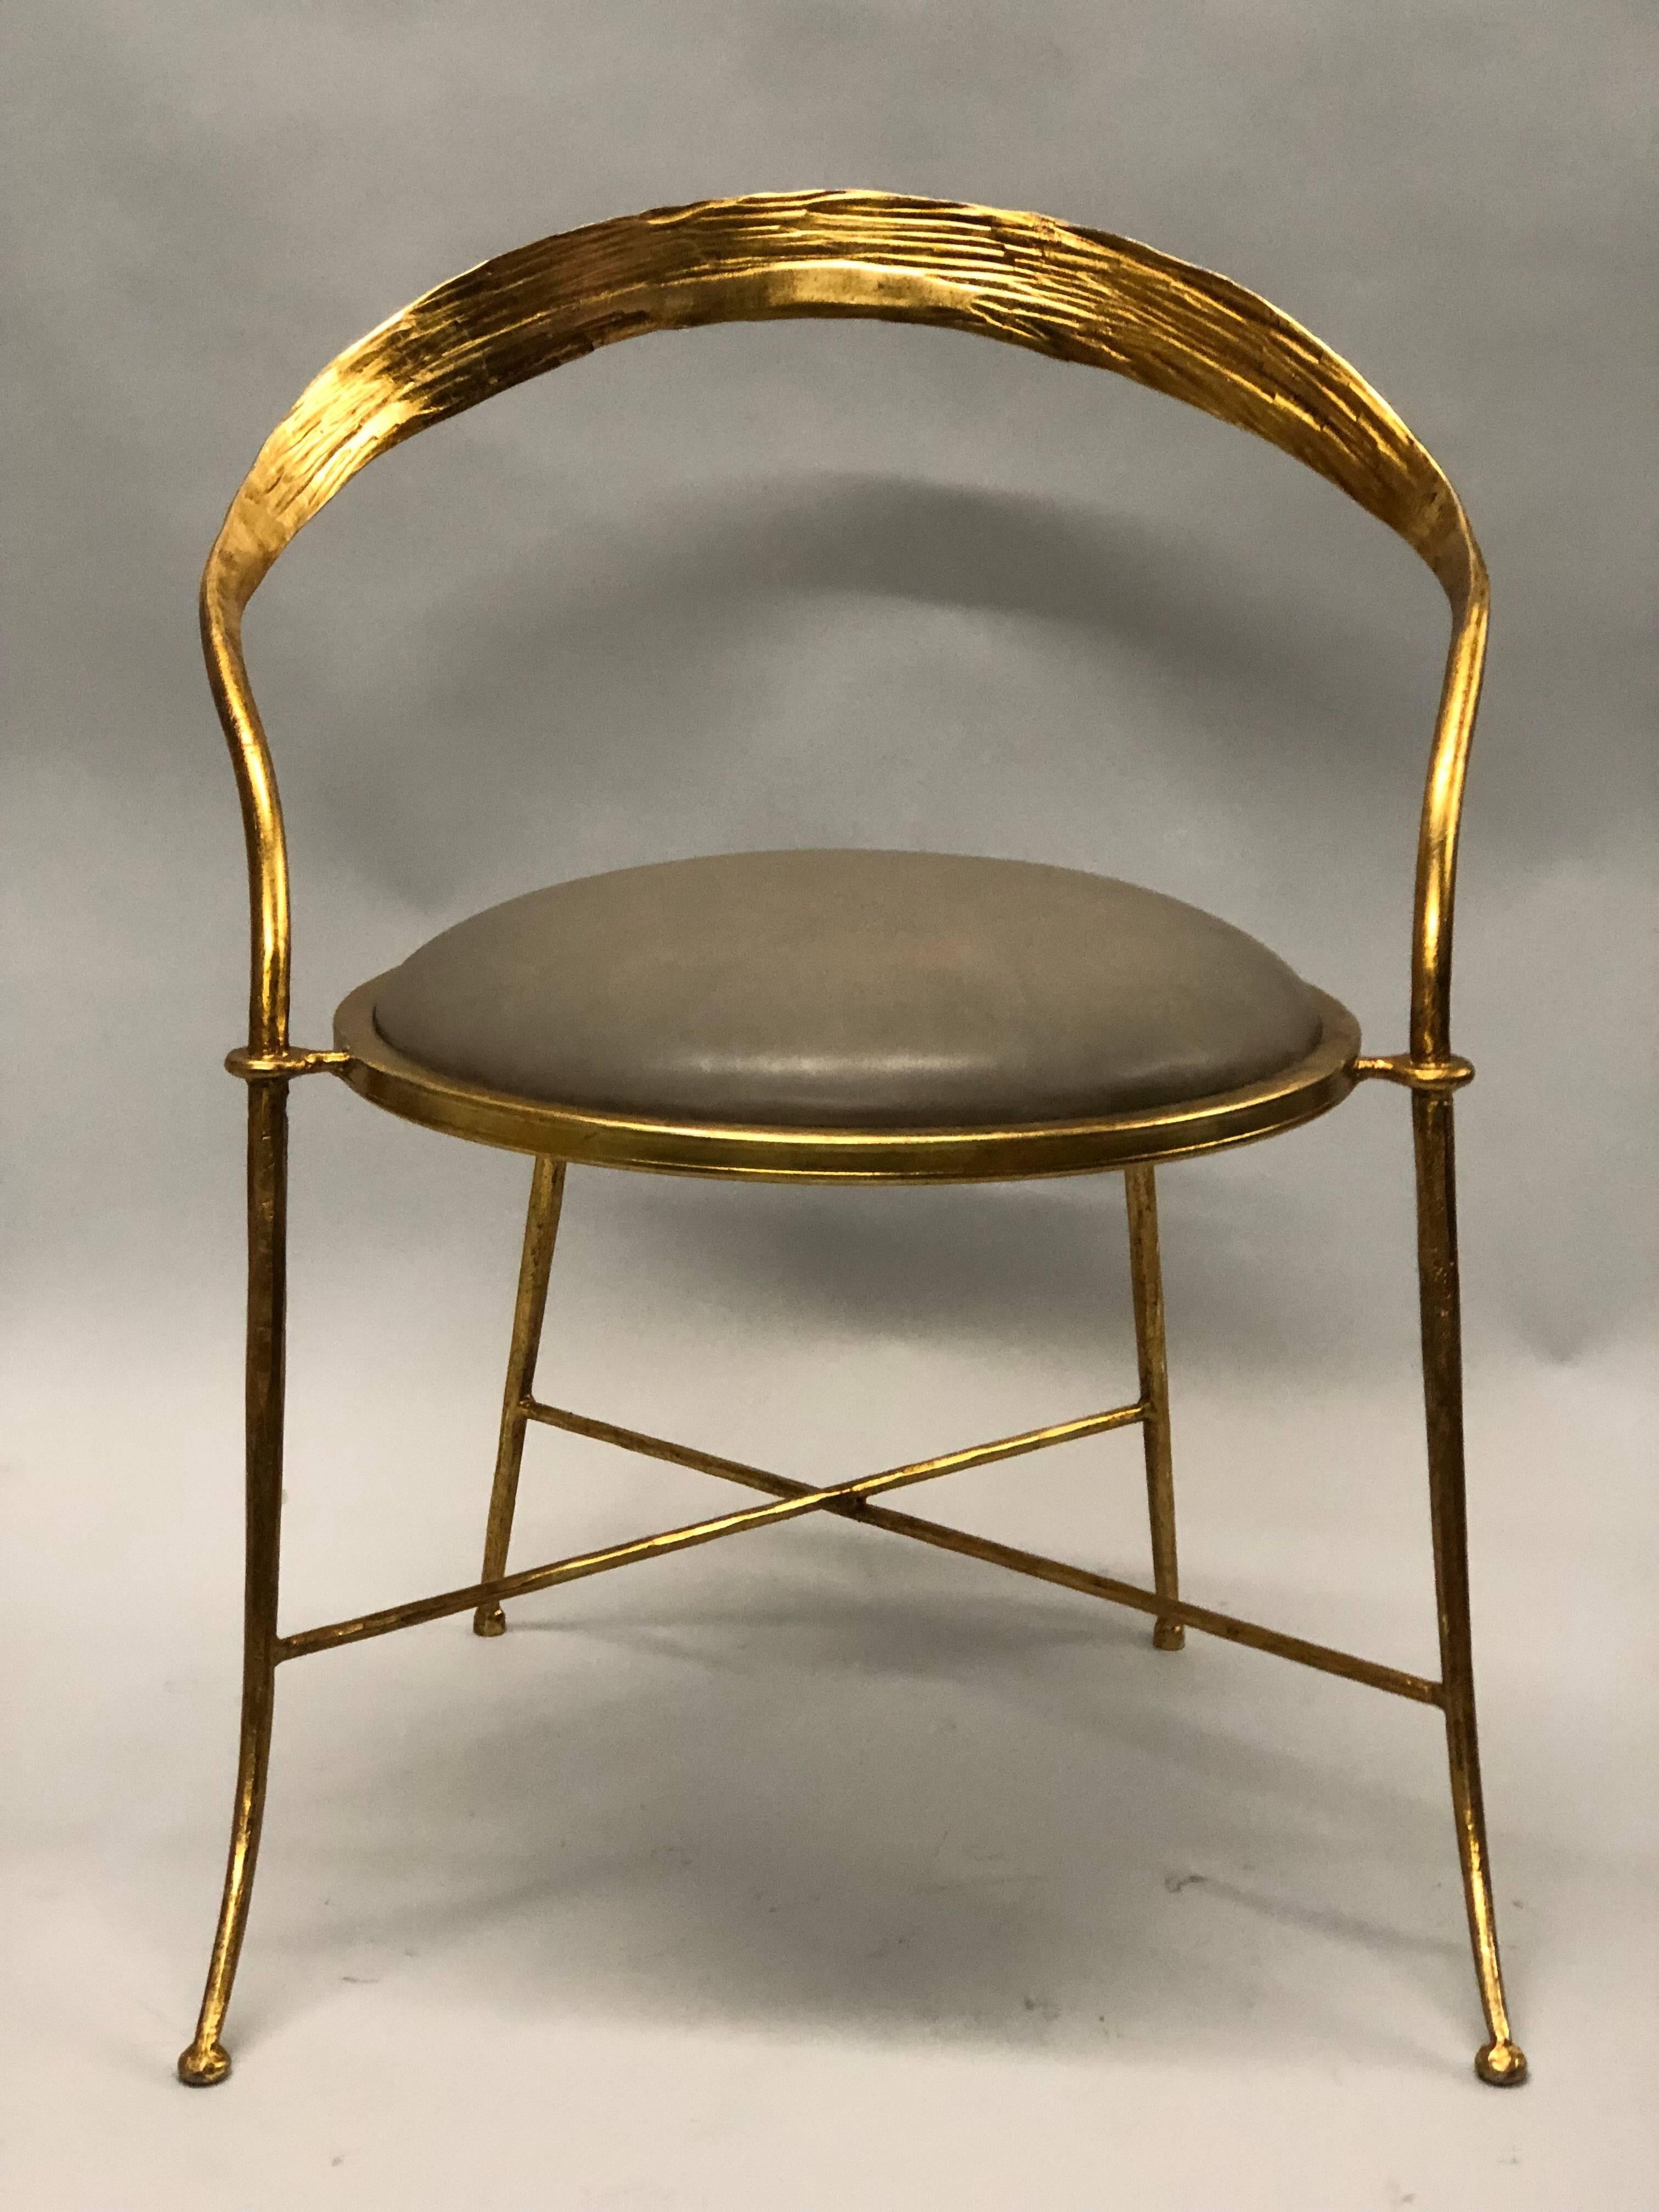 Pair of Italian Mid-Century Modern gilt iron lounge chairs or armchairs by Giovanni Banci.

The chairs feature strong but delicate ironwork and design influenced by a Modern Neoclassicism and Italian design. The backrest is daringly curved, the